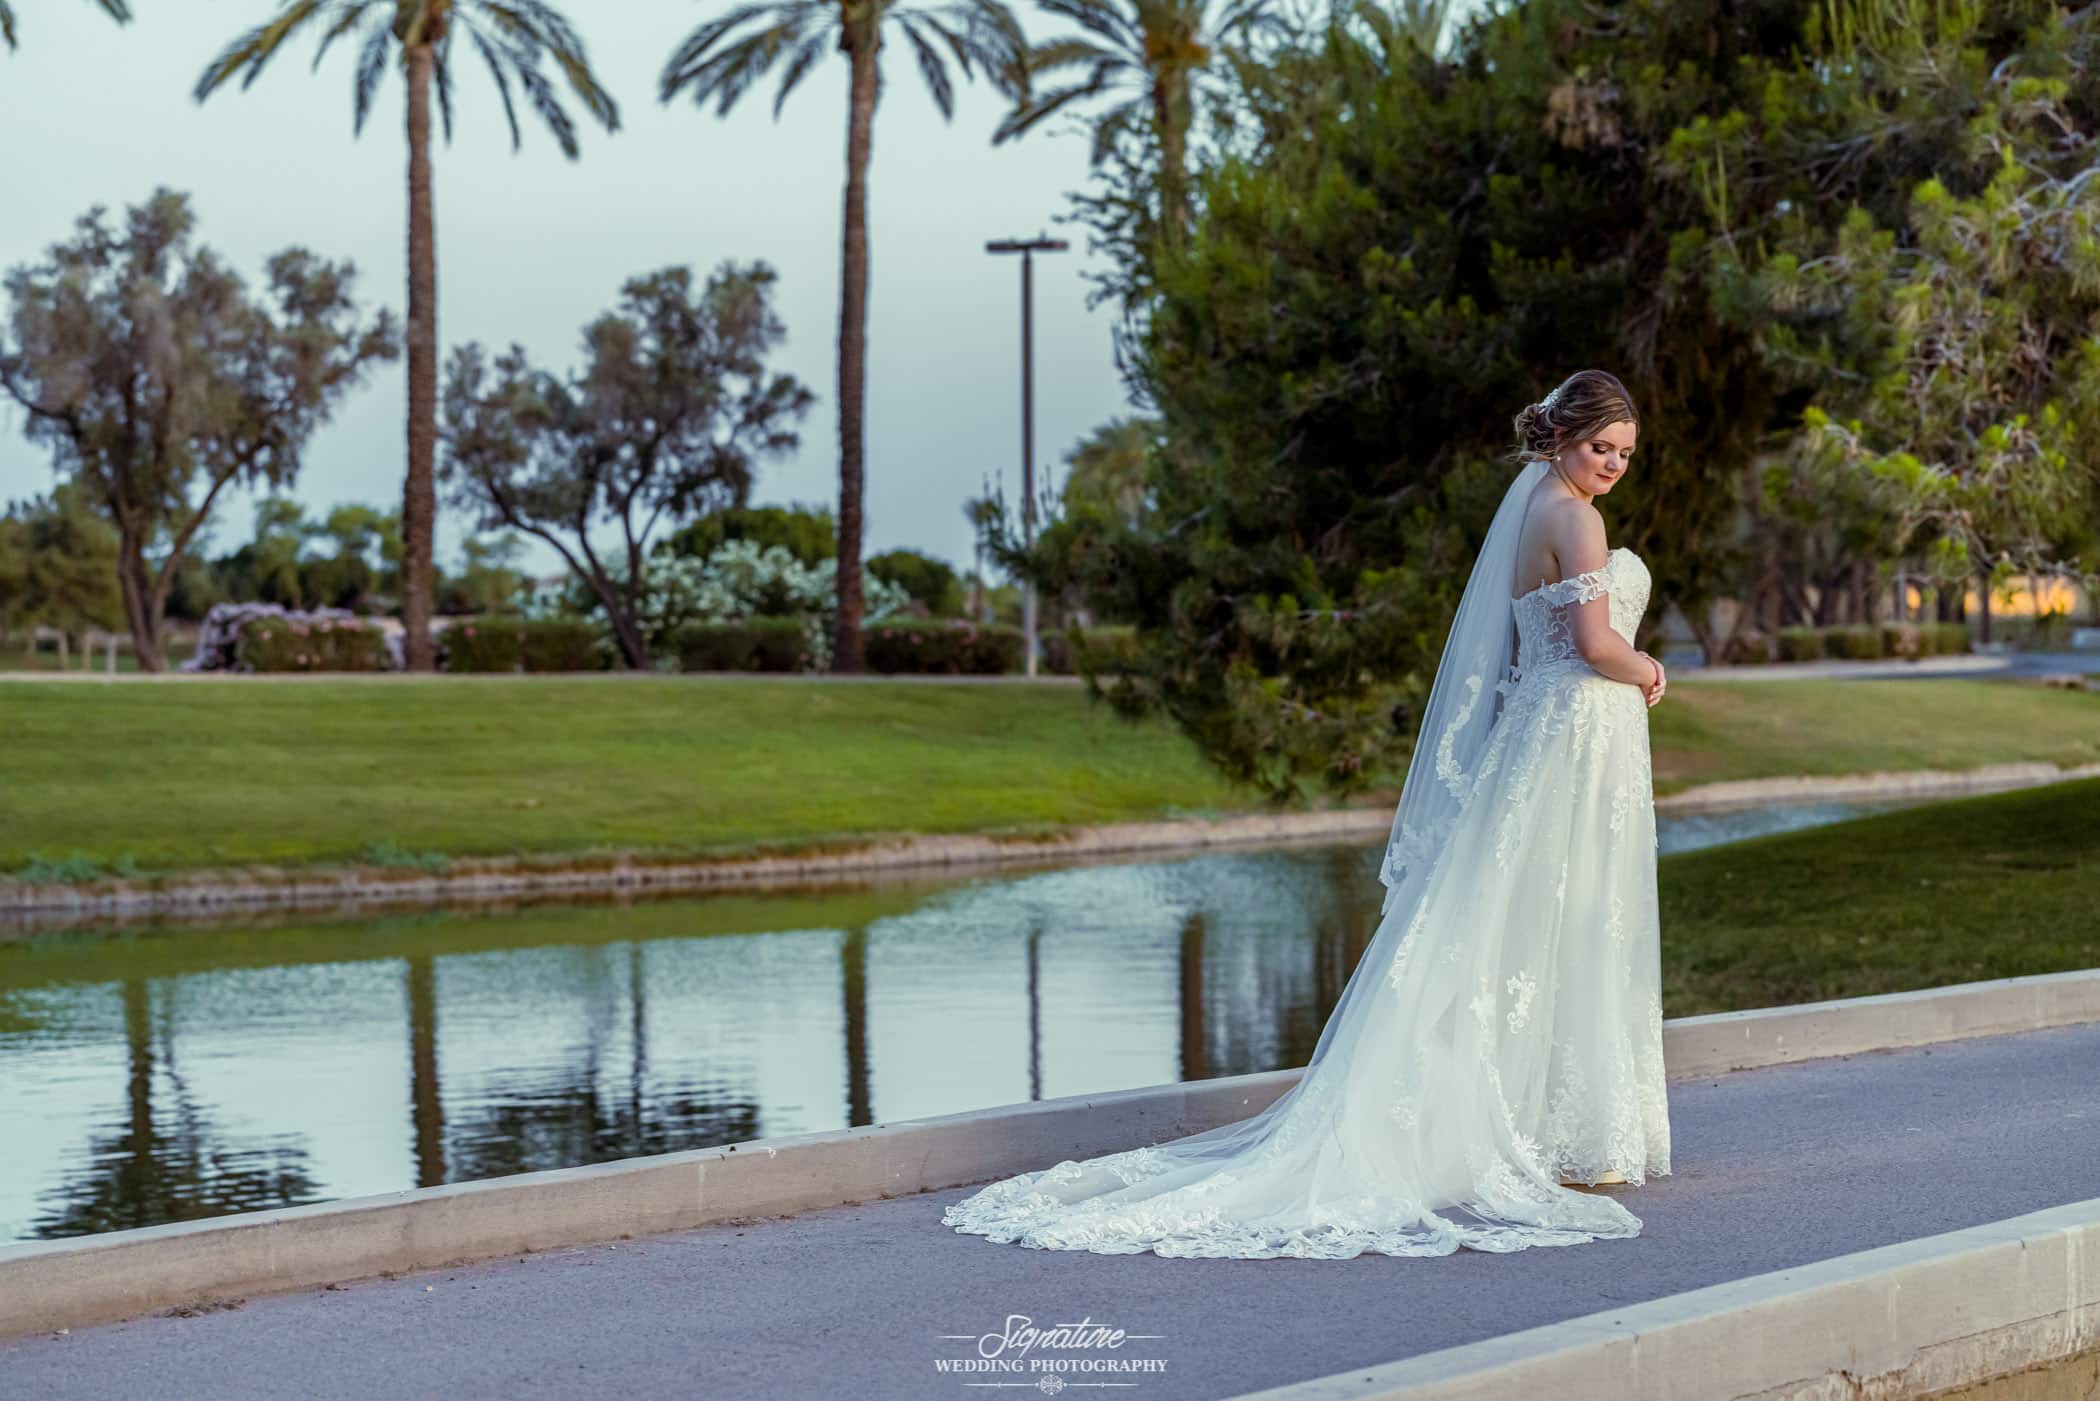 Bride standing in front of pond looking down